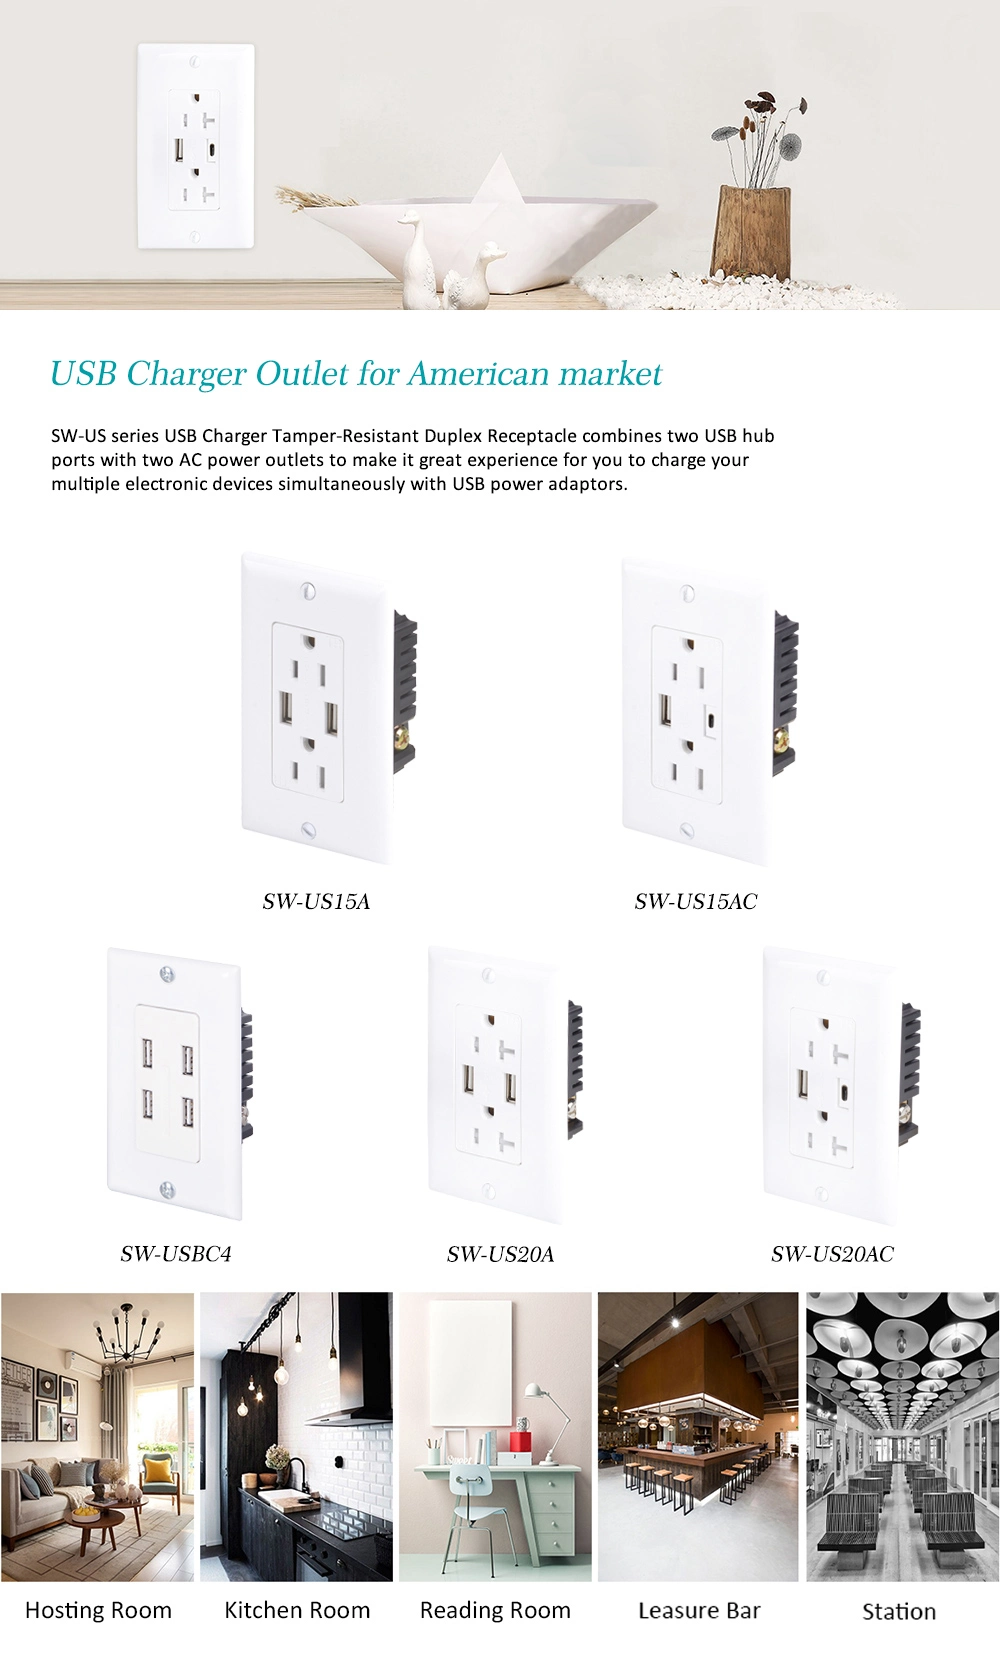 USB Outlet ETL Listed High Speed Dual USB Charger and Duplex Receptacle 15-AMP, 4A Charging Capability, Tamper Resistant Safety Outlet USB with Wall Plate